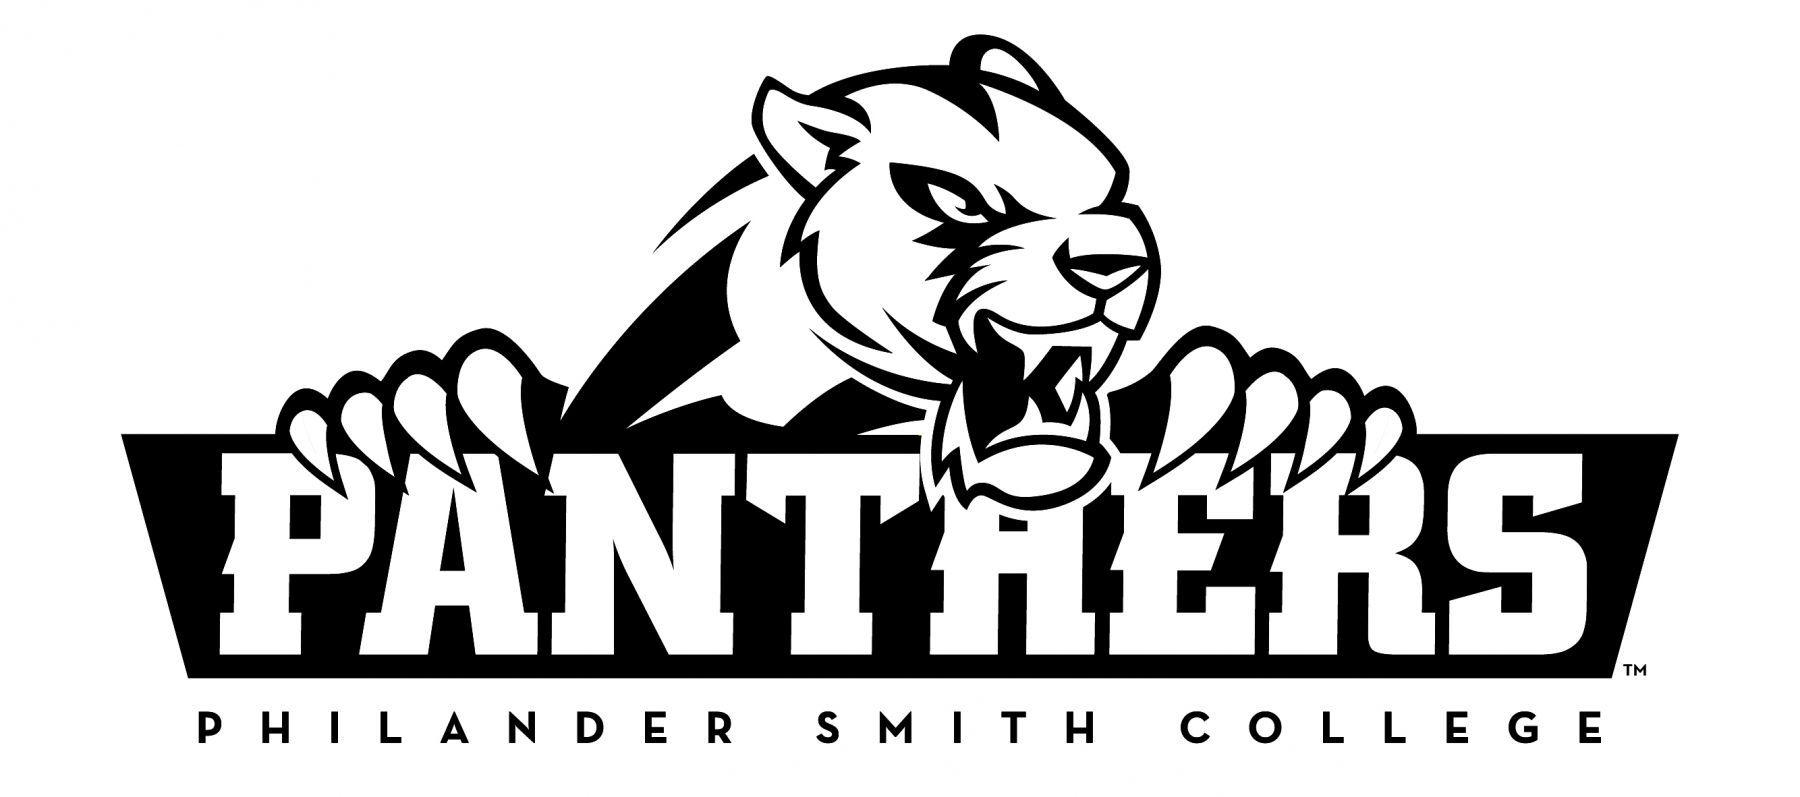 Black and White Panther Logo - Quick Facts | Philander Smith College Athletics